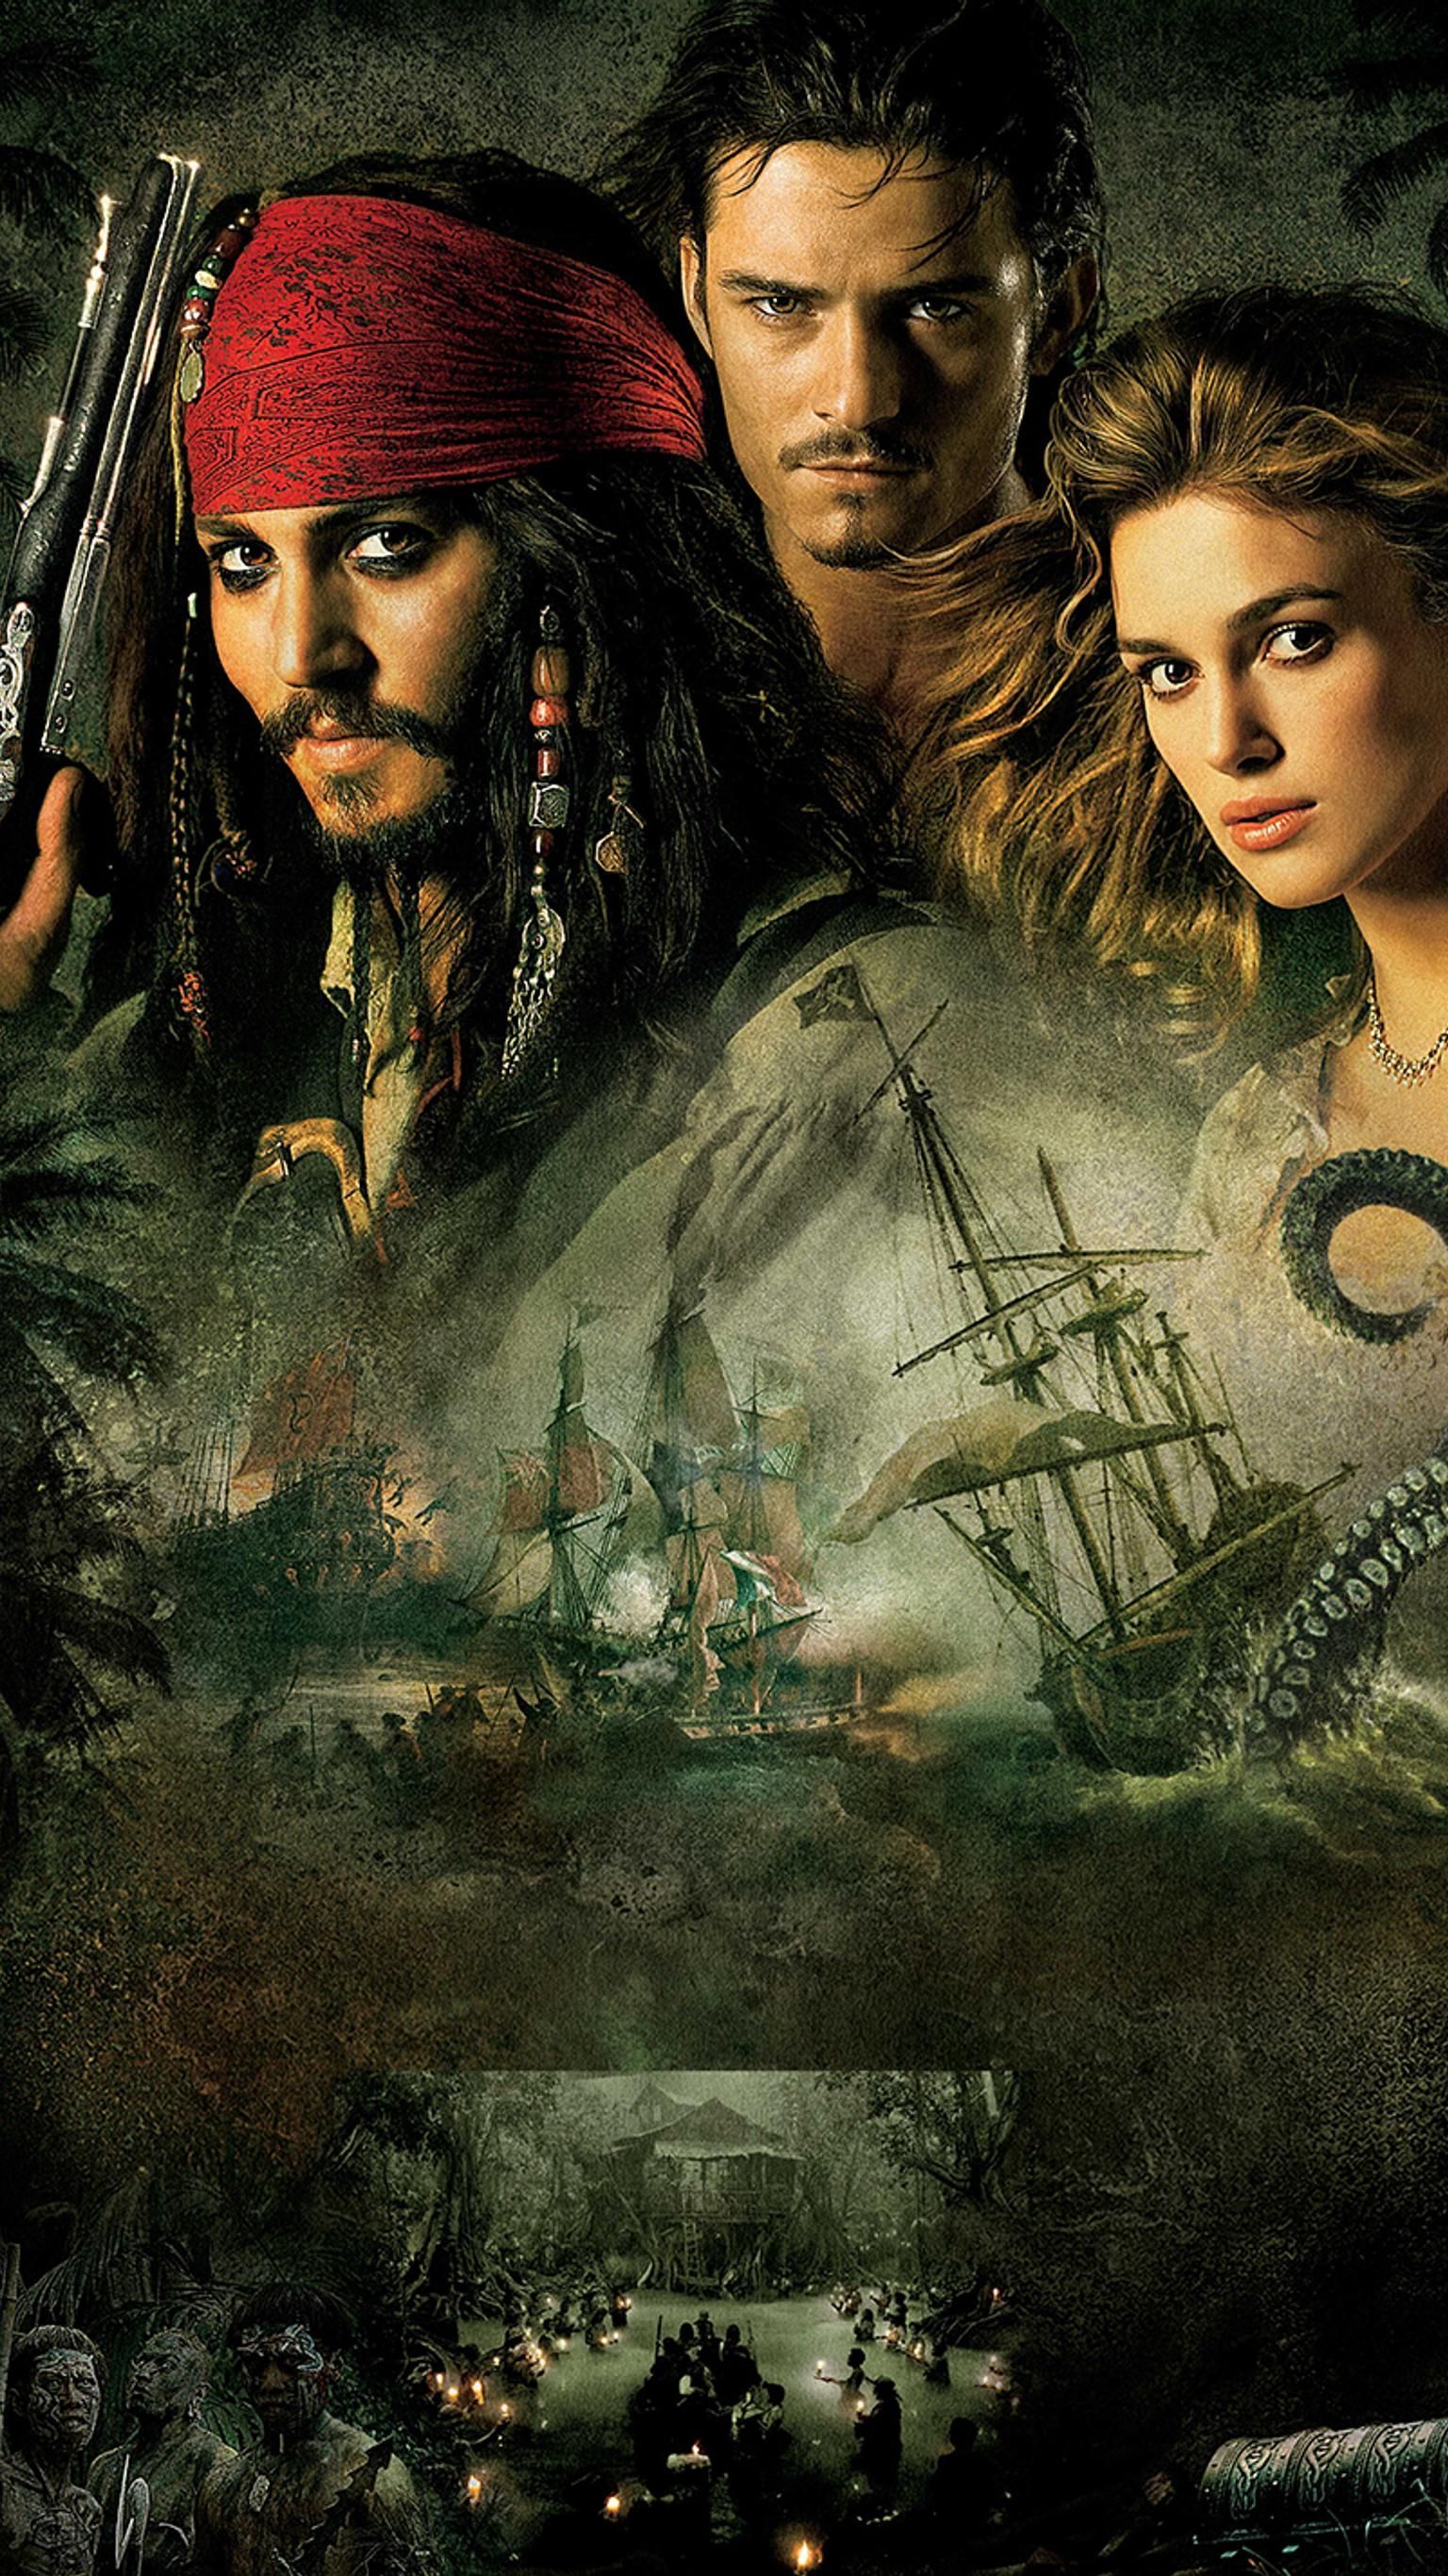 Pirates of the Caribbean: Dead Man's Chest (2006) Phone Wallpaper. Moviemania. Pirates of the caribbean, Jack sparrow wallpaper, Caribbean